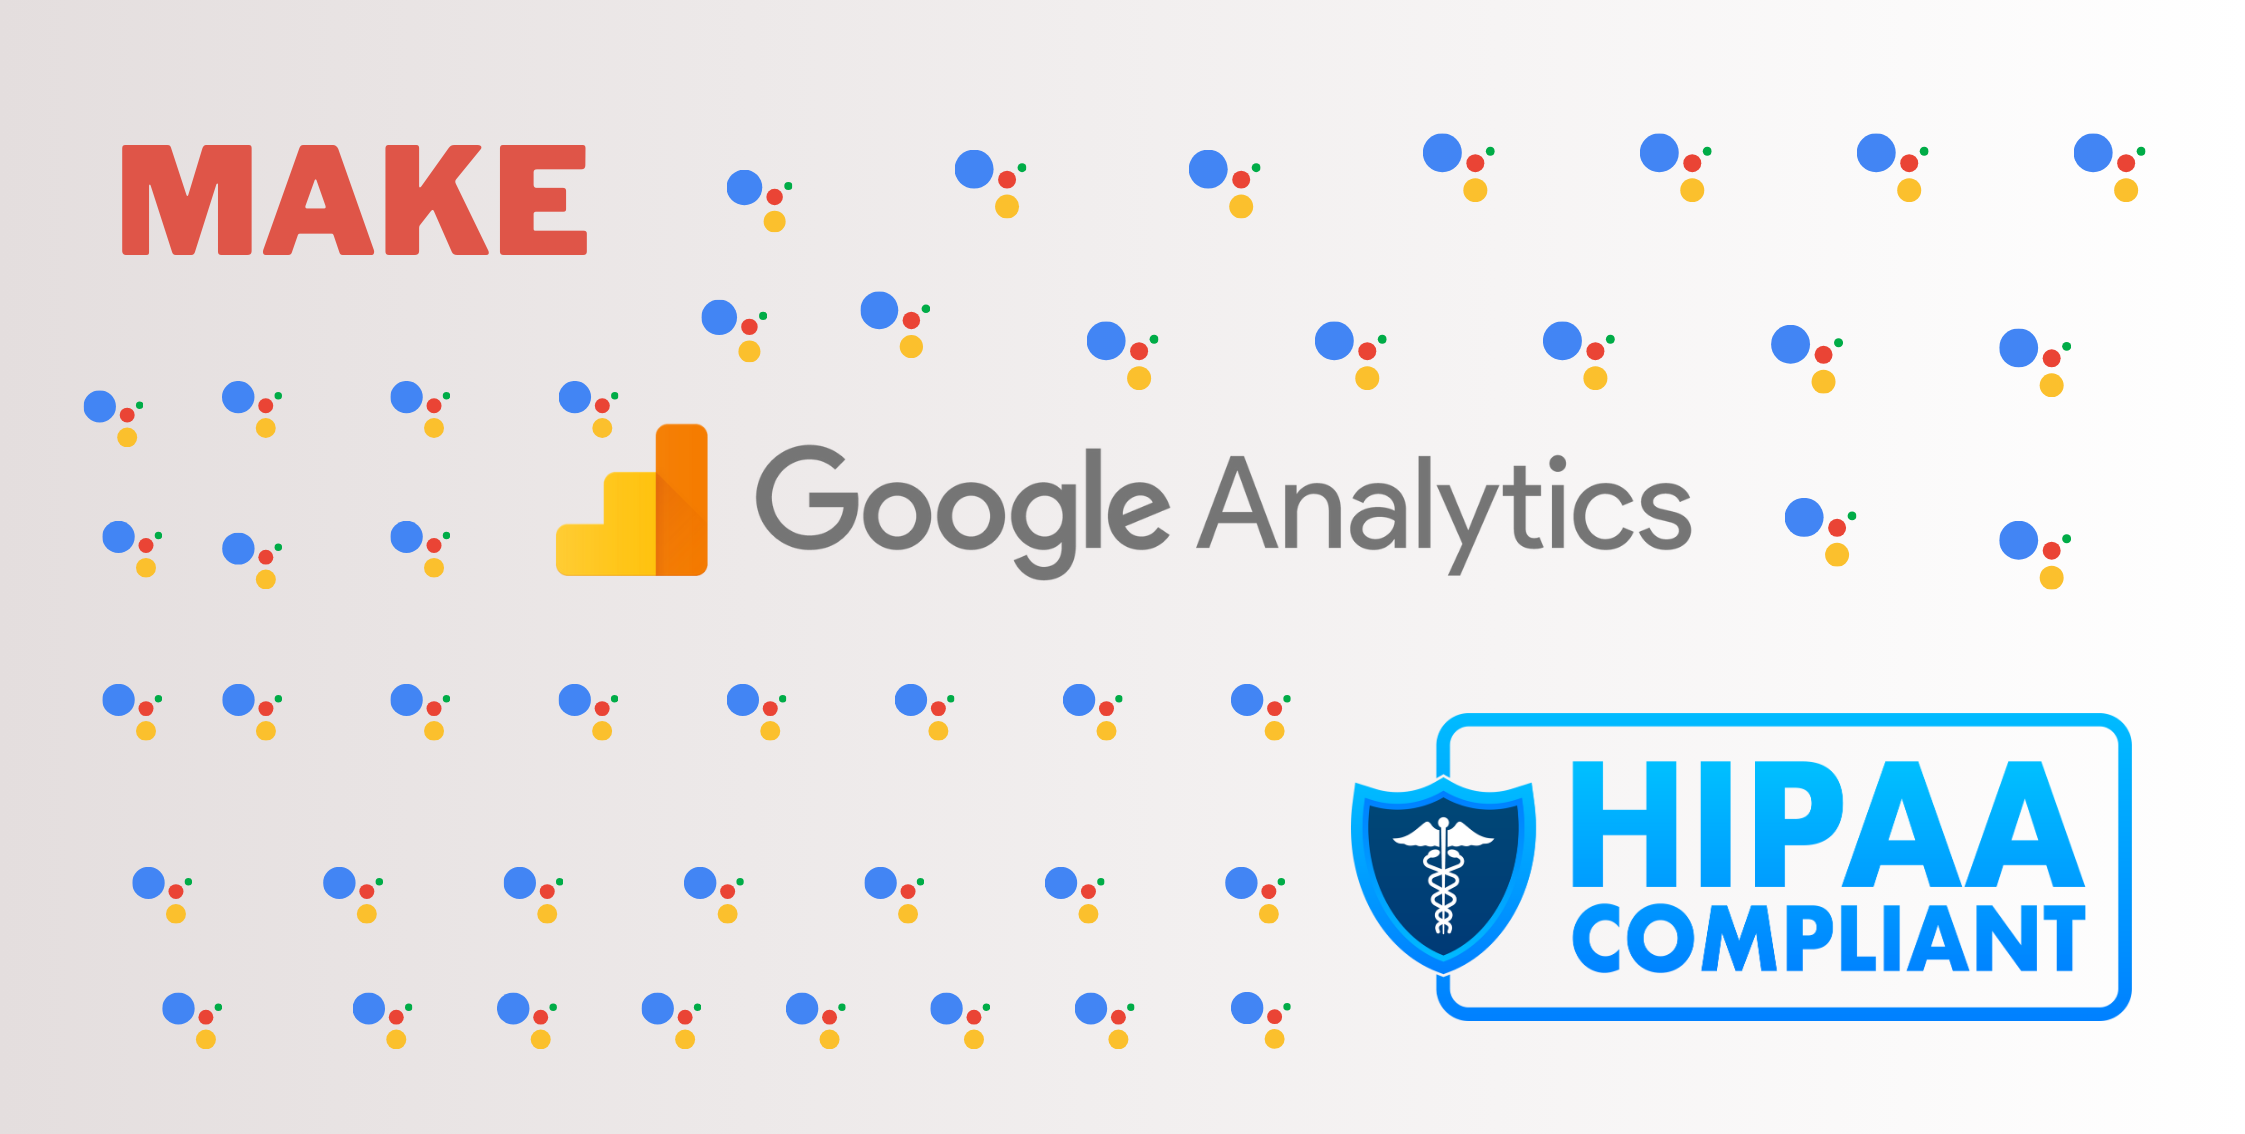 Is Google Analytics HIPAA-Compliant? - All You Need to Know